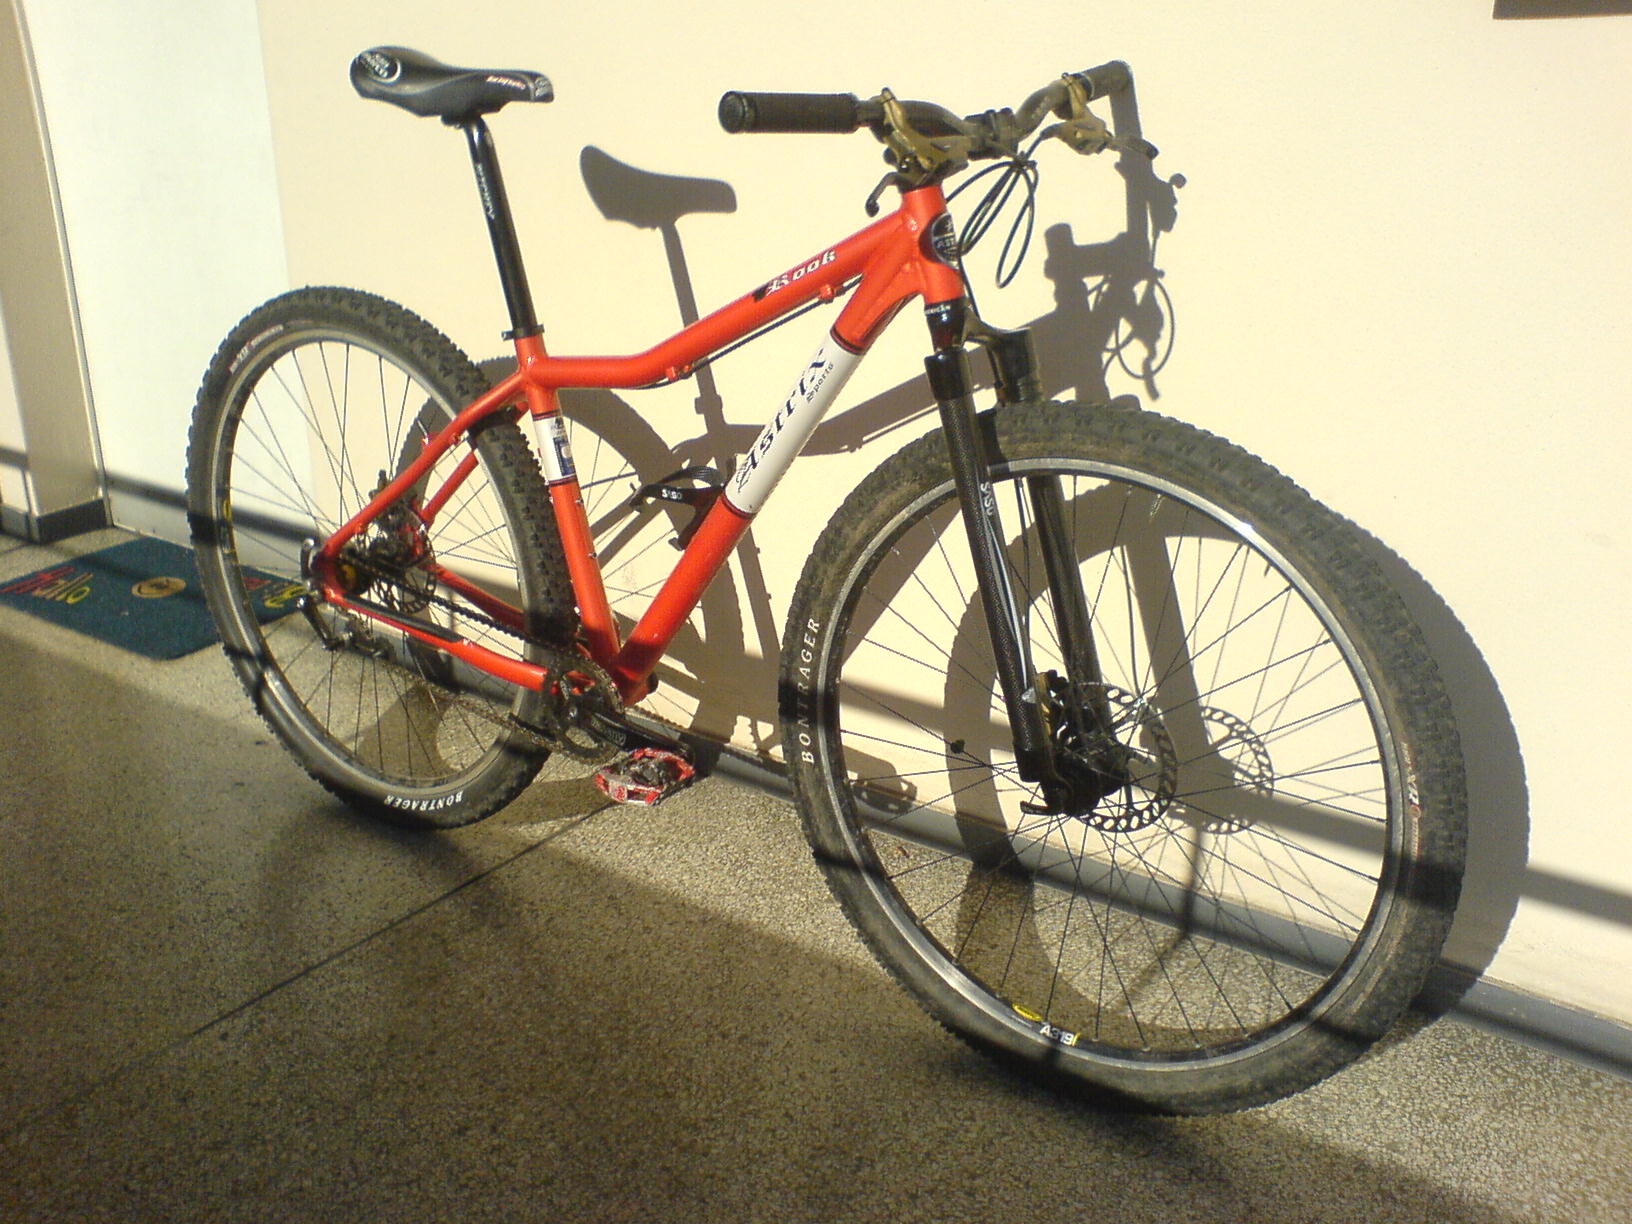 a red and black bike on its stand against a wall